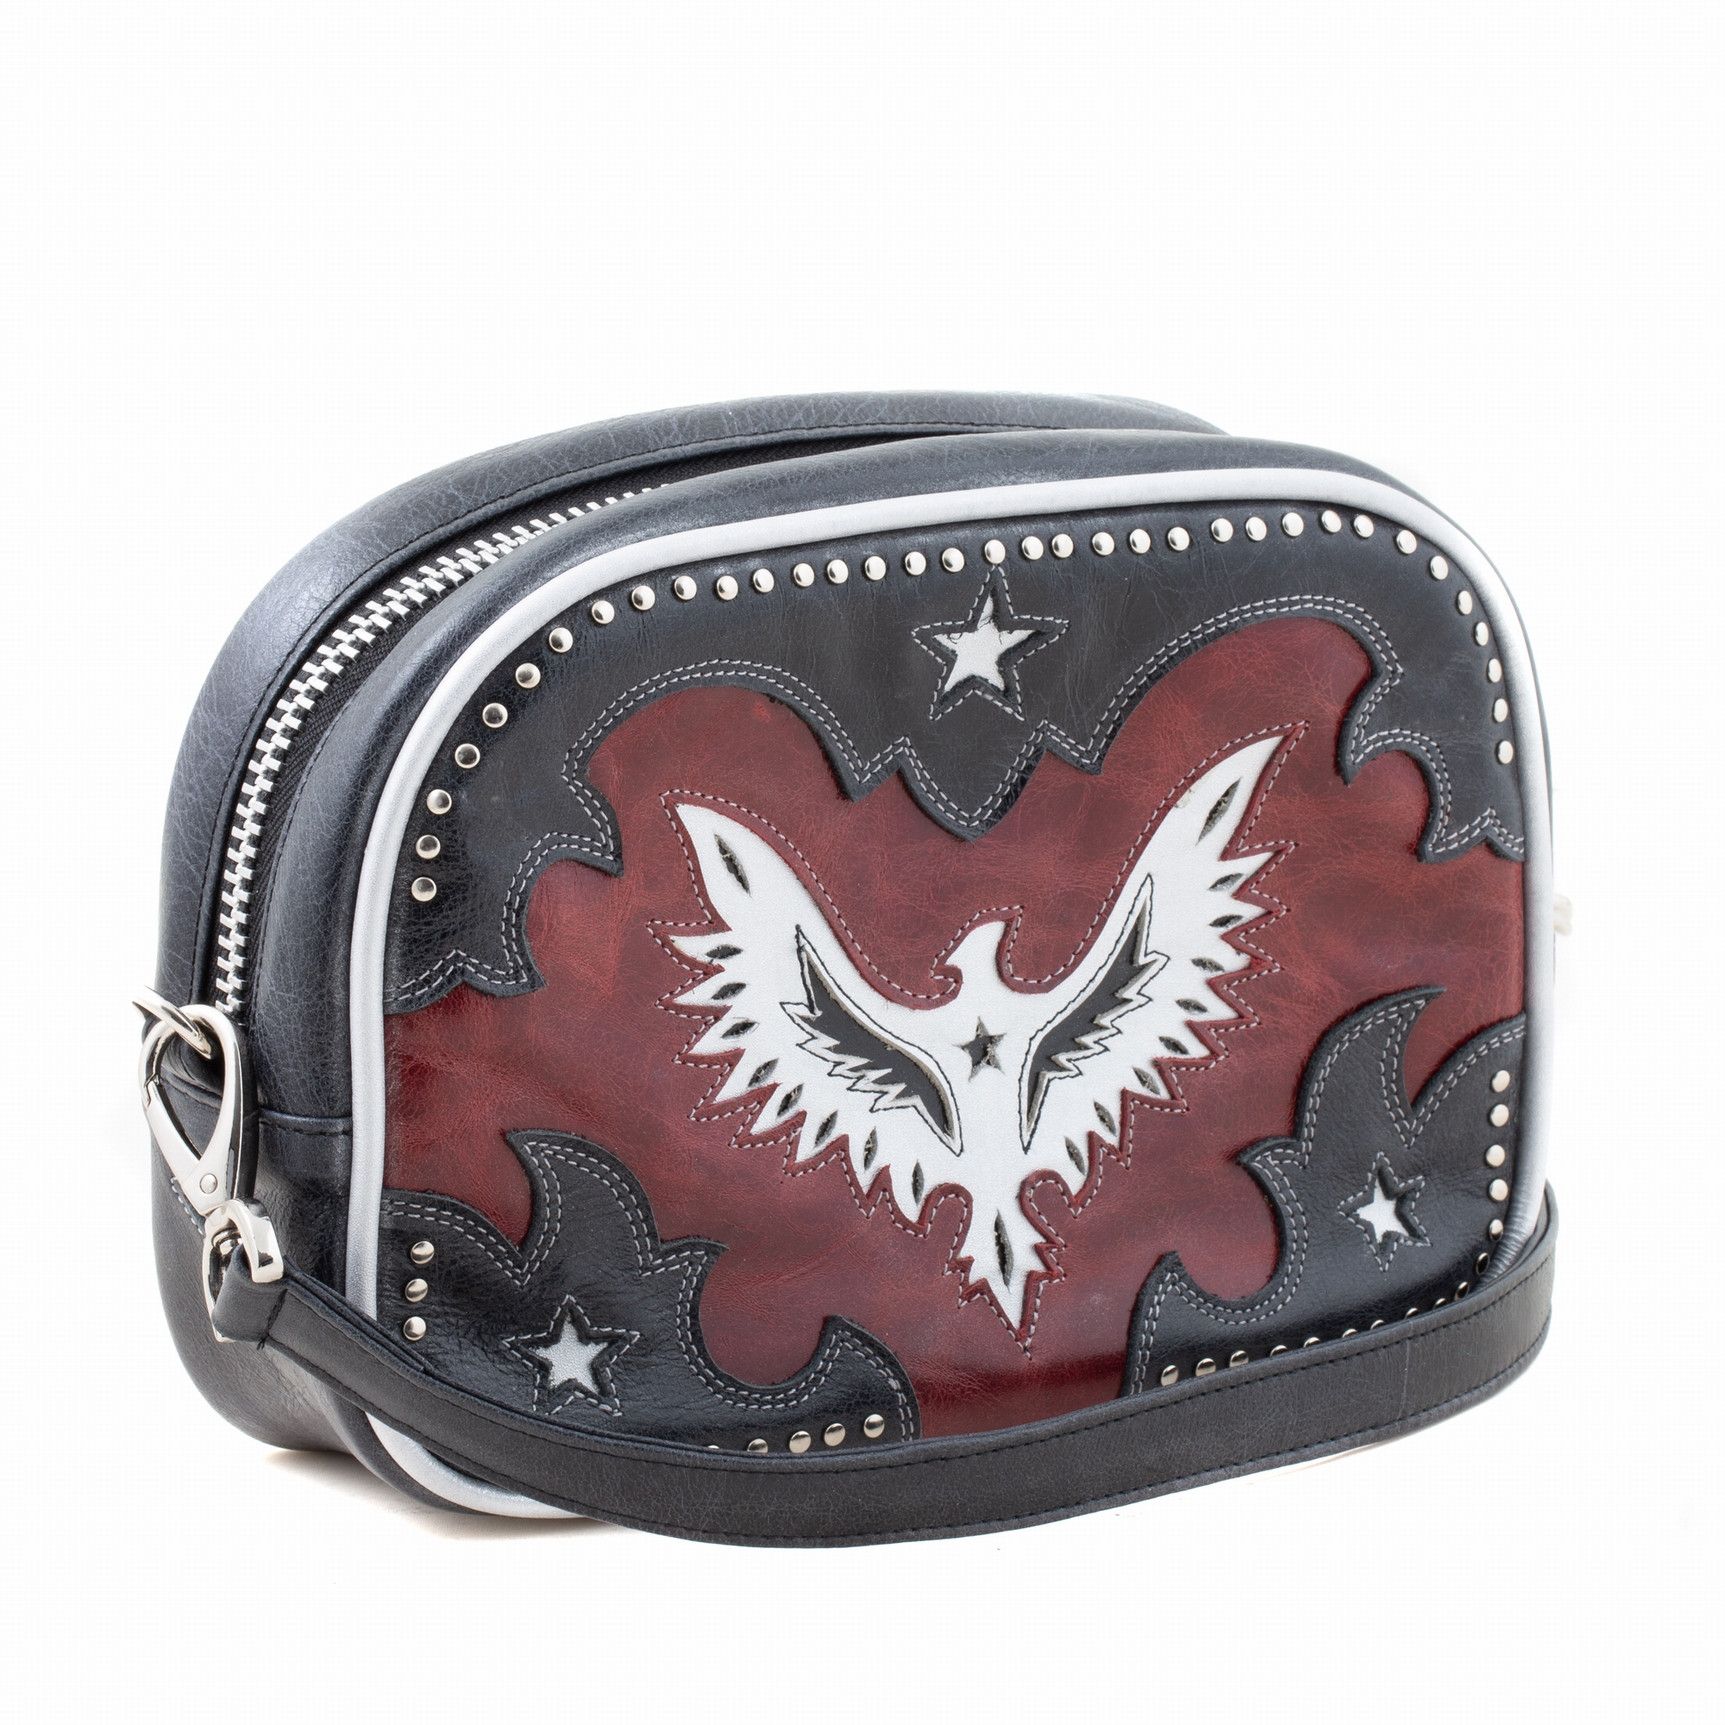 MINIBAG EAGLE RED BLACK SILVER MINI BAG WITH LEATHER INLAY AND STUDS  Mix color red / black / silver  Cowhide leather  Leather l